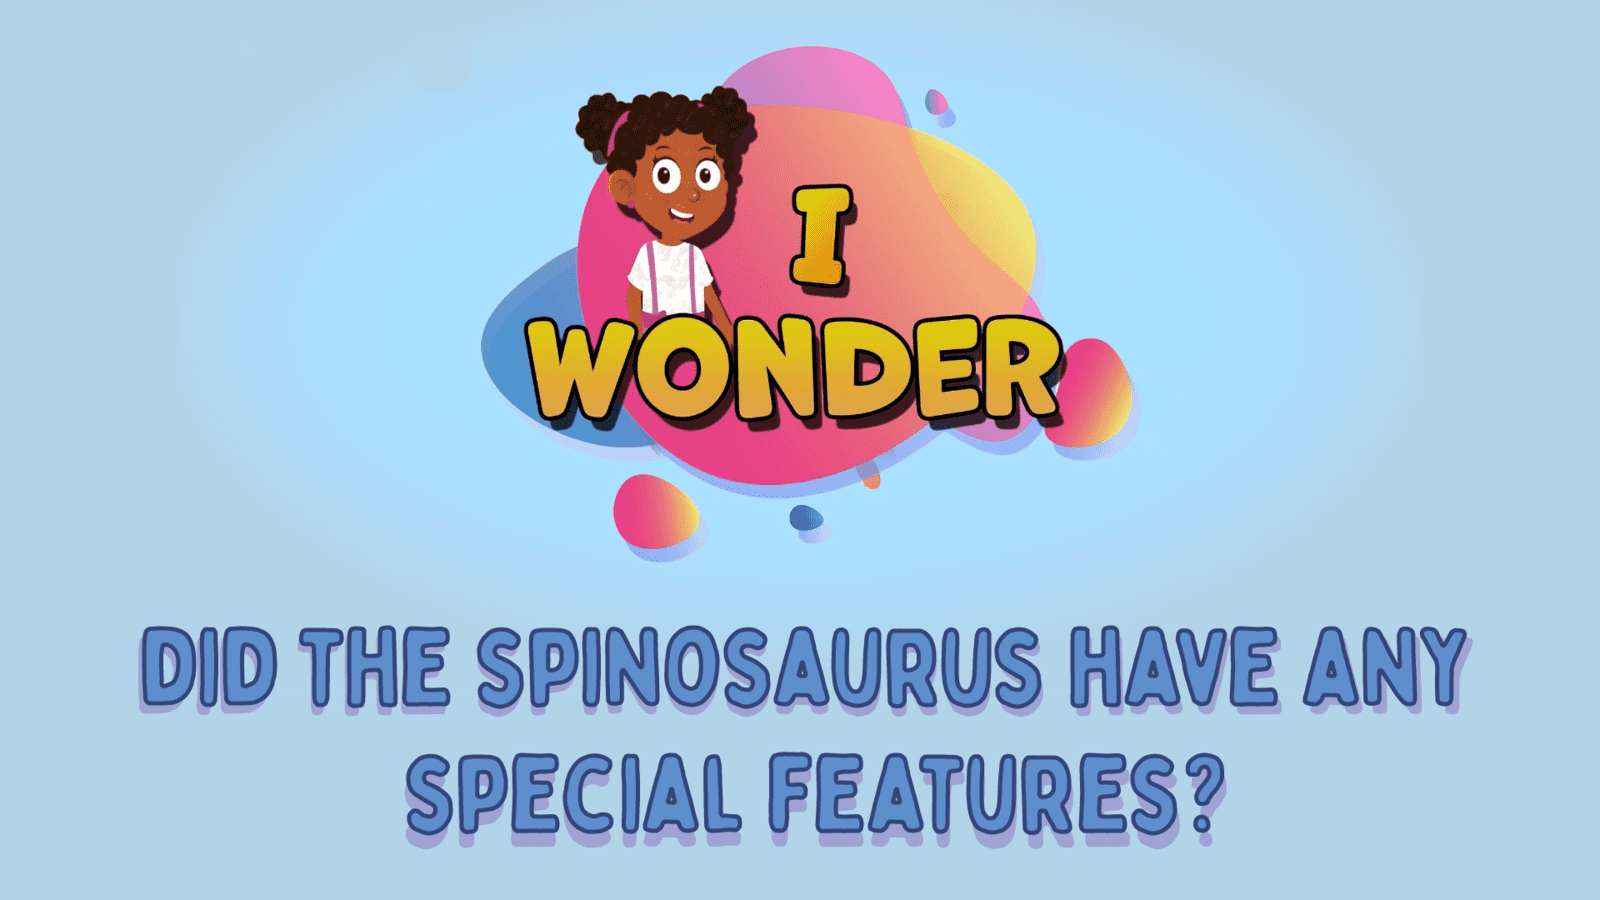 Did The Spinosaurus Have Any Special Features?